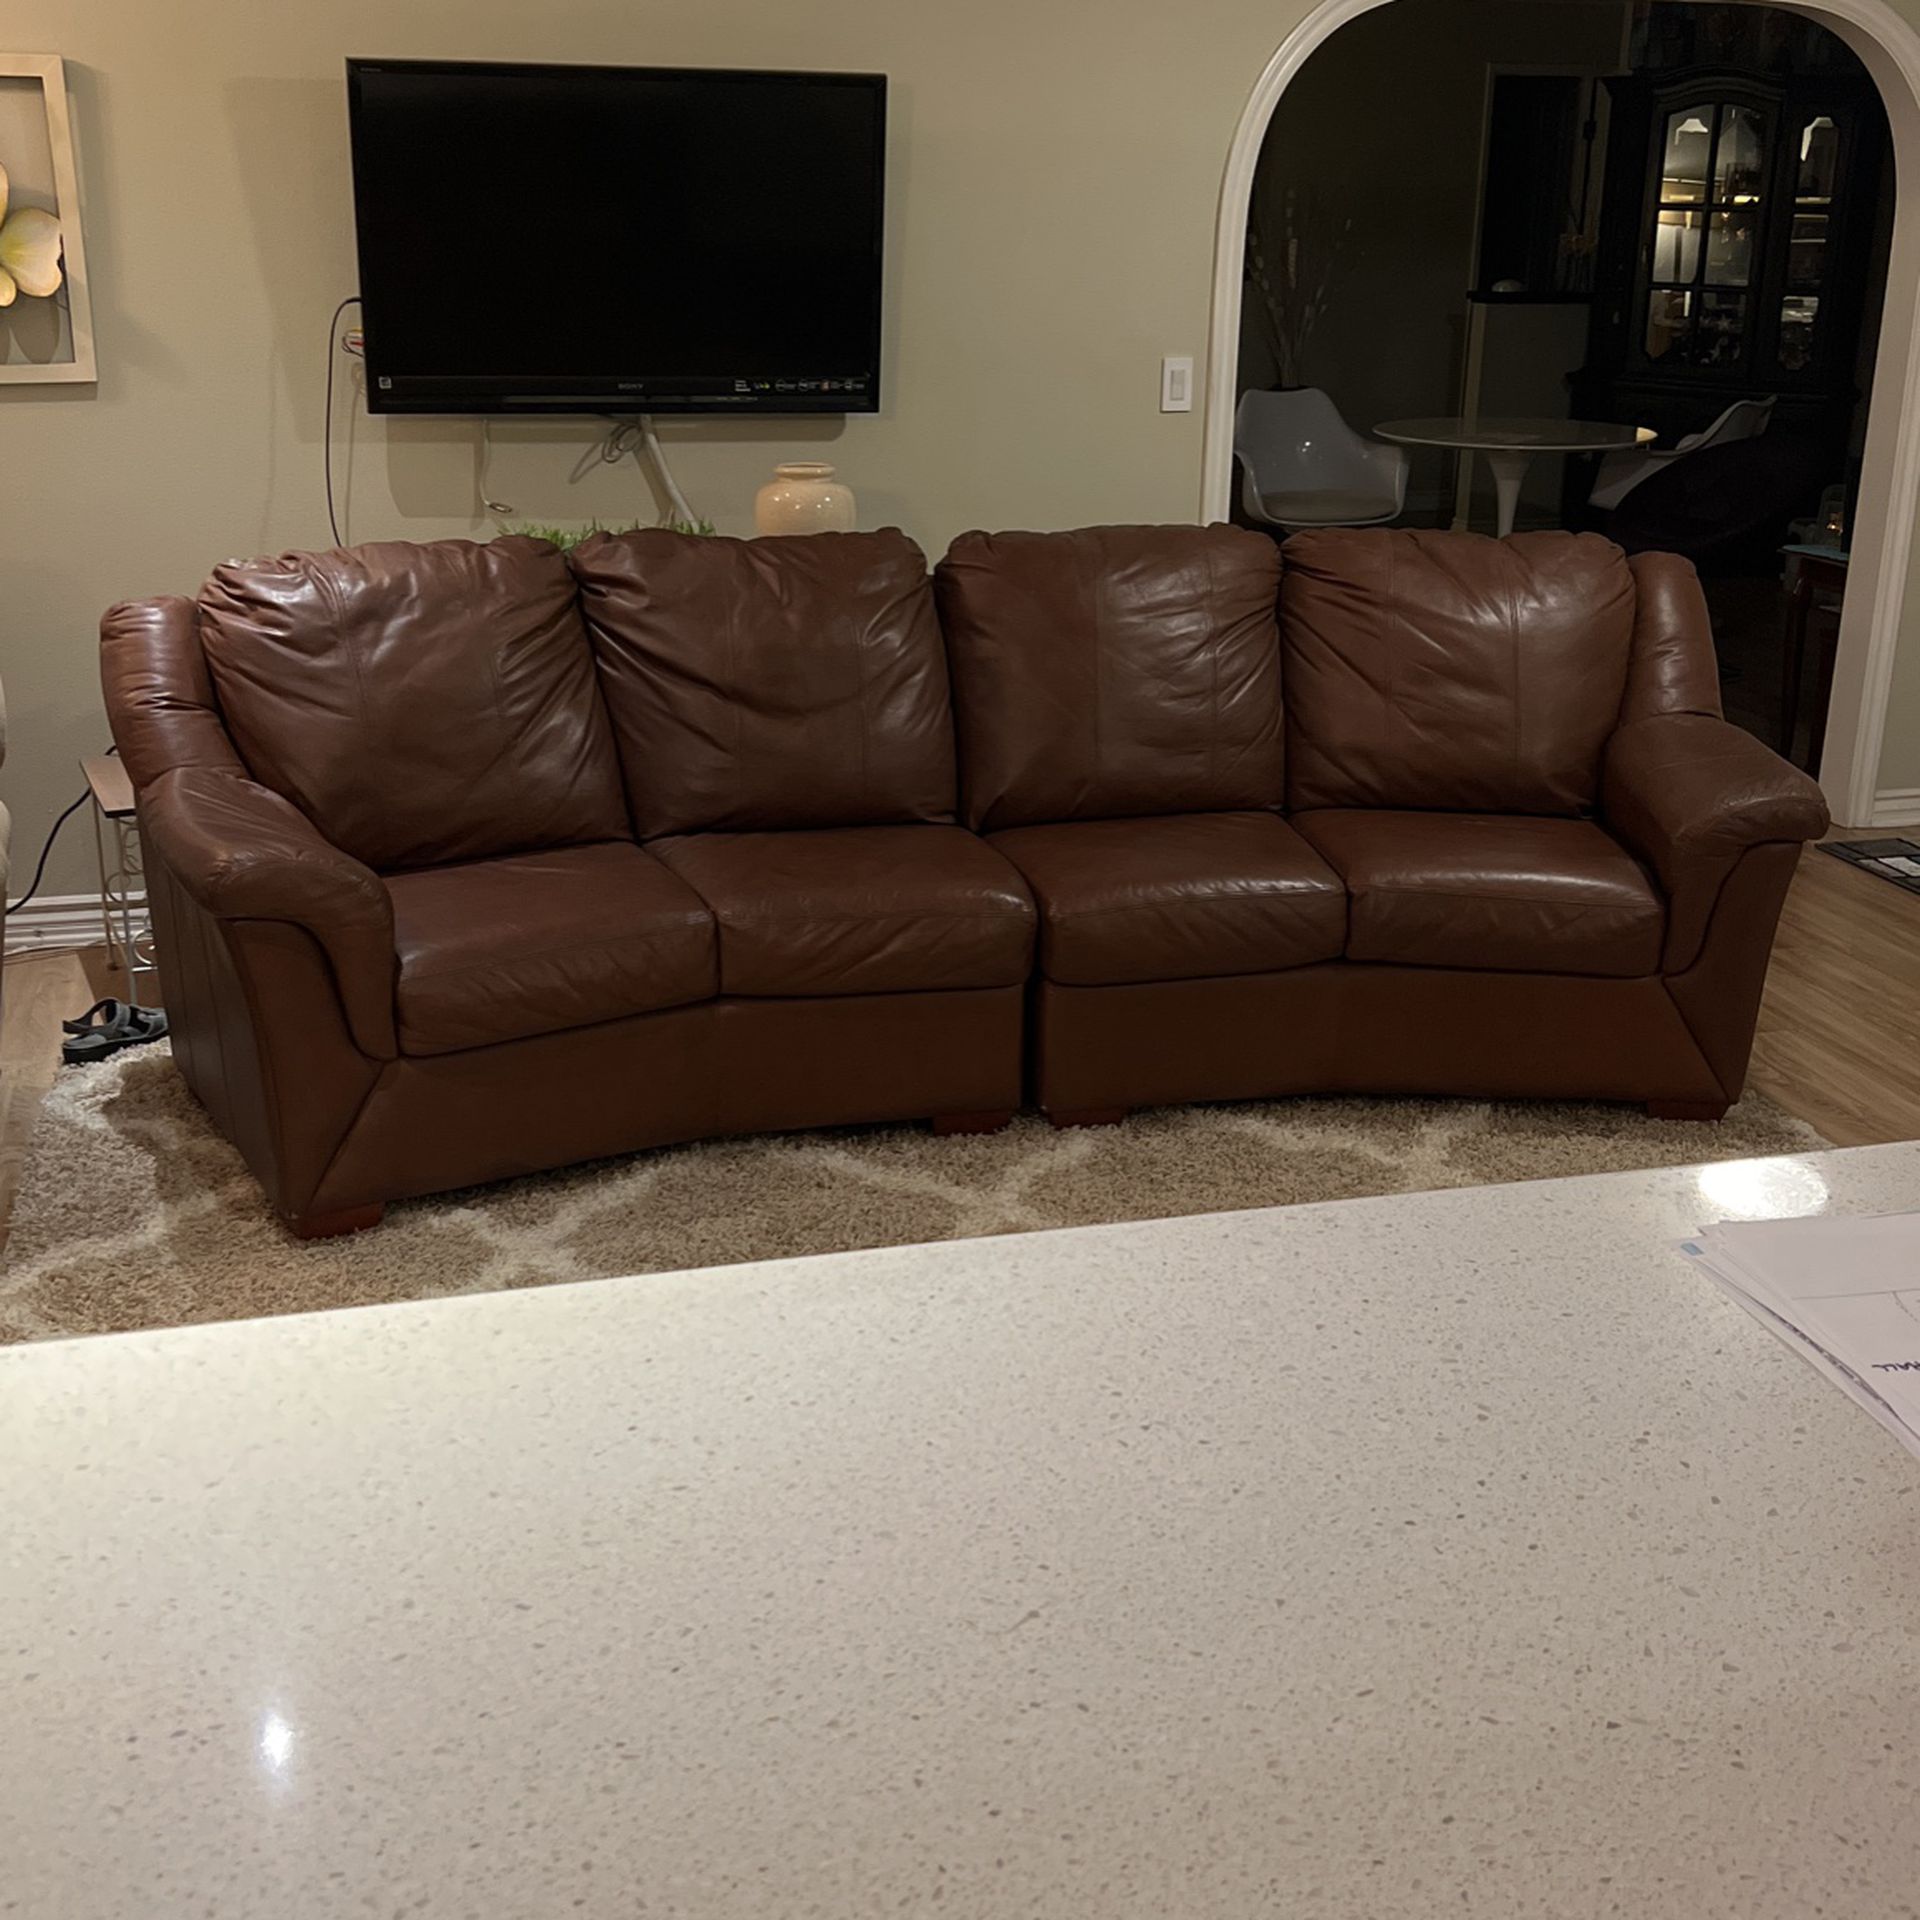 9’ Sectional Leather Couch